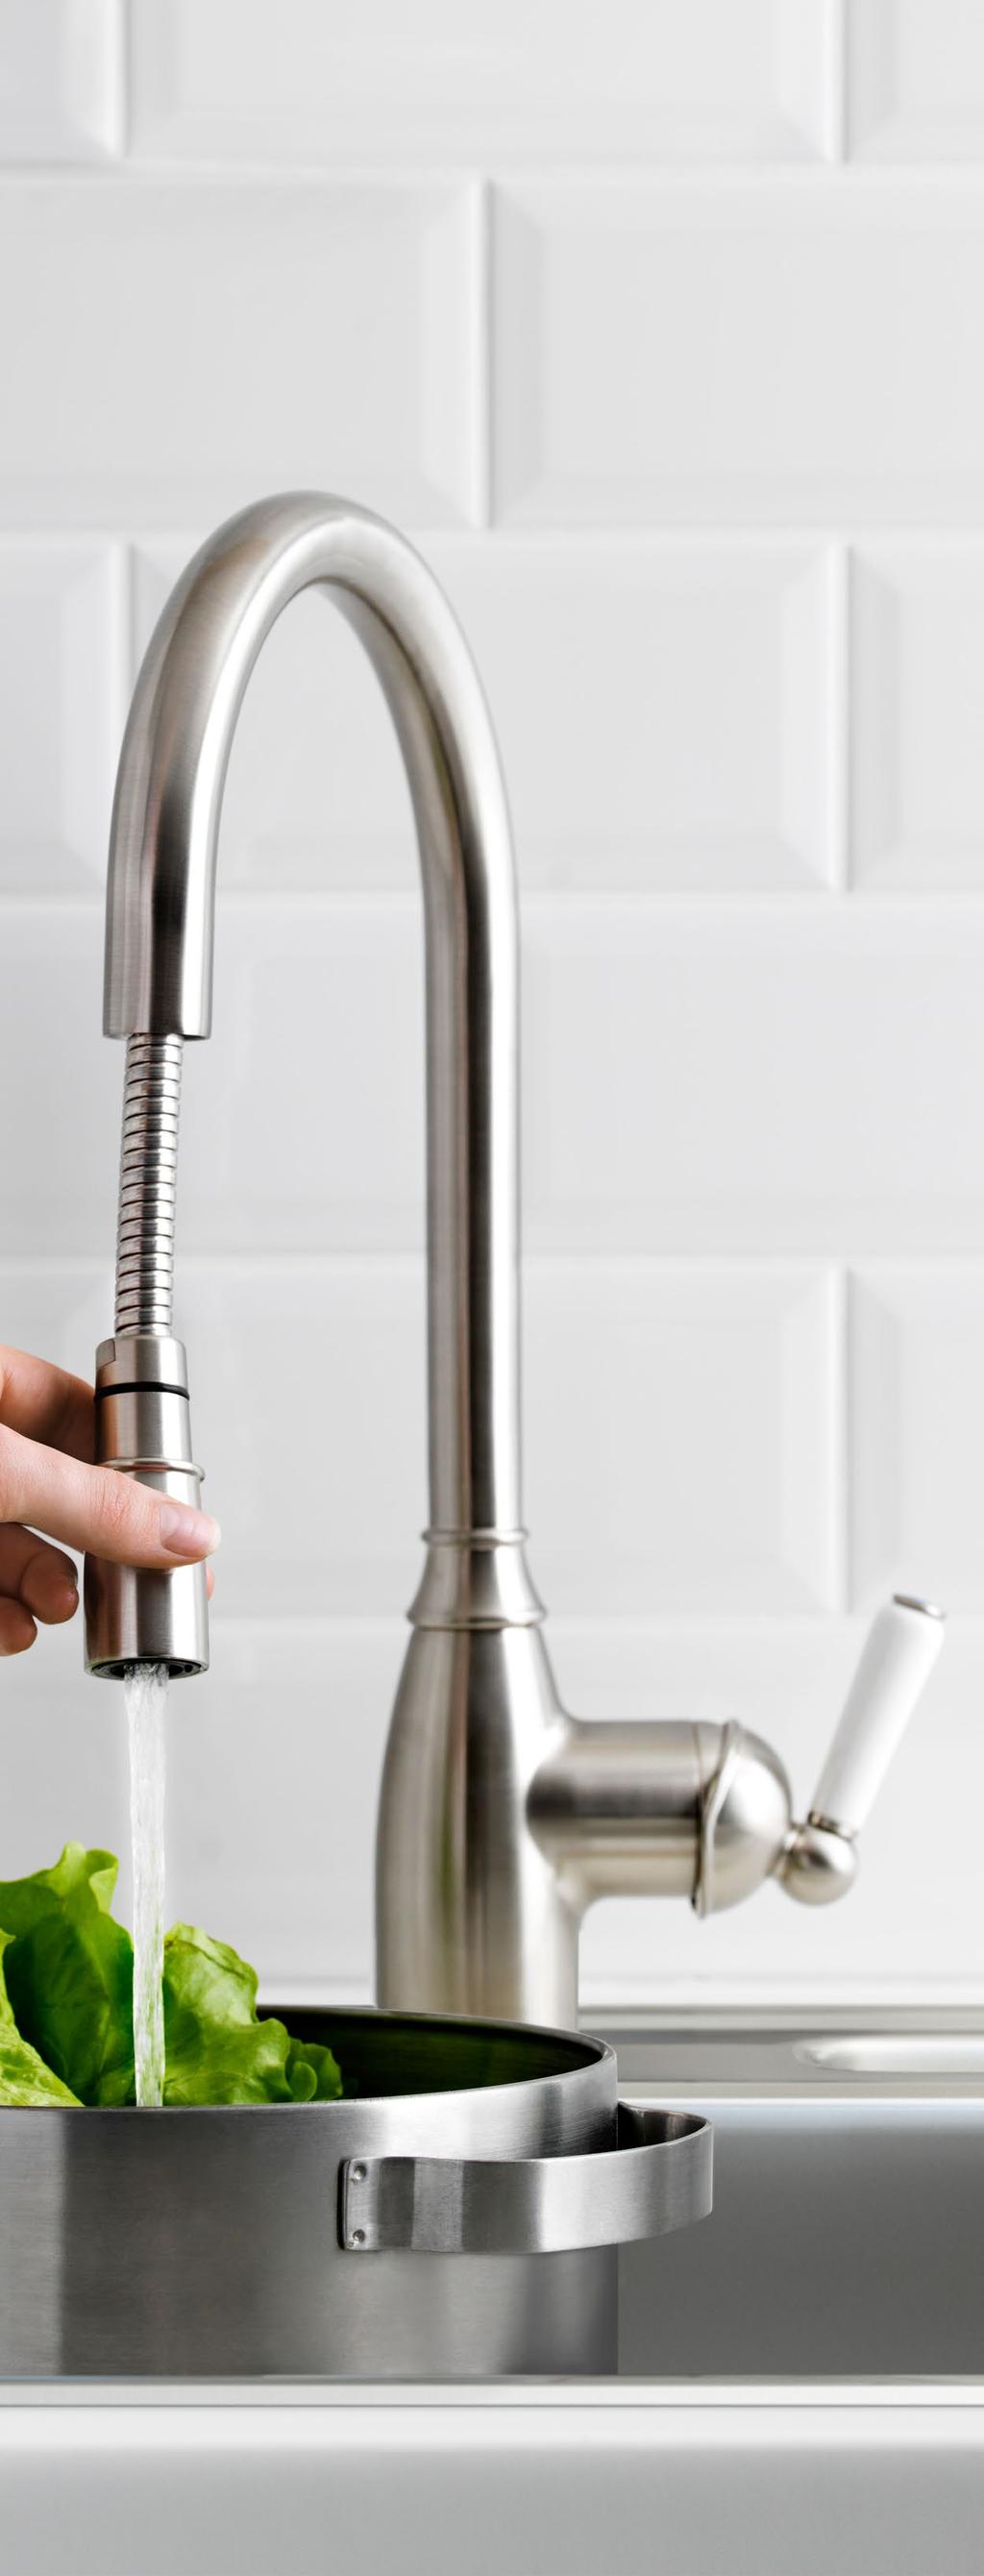 All our kitchen taps comply with European standards which mean that our taps are tested and approved for every market and fulfill every standard on the specific